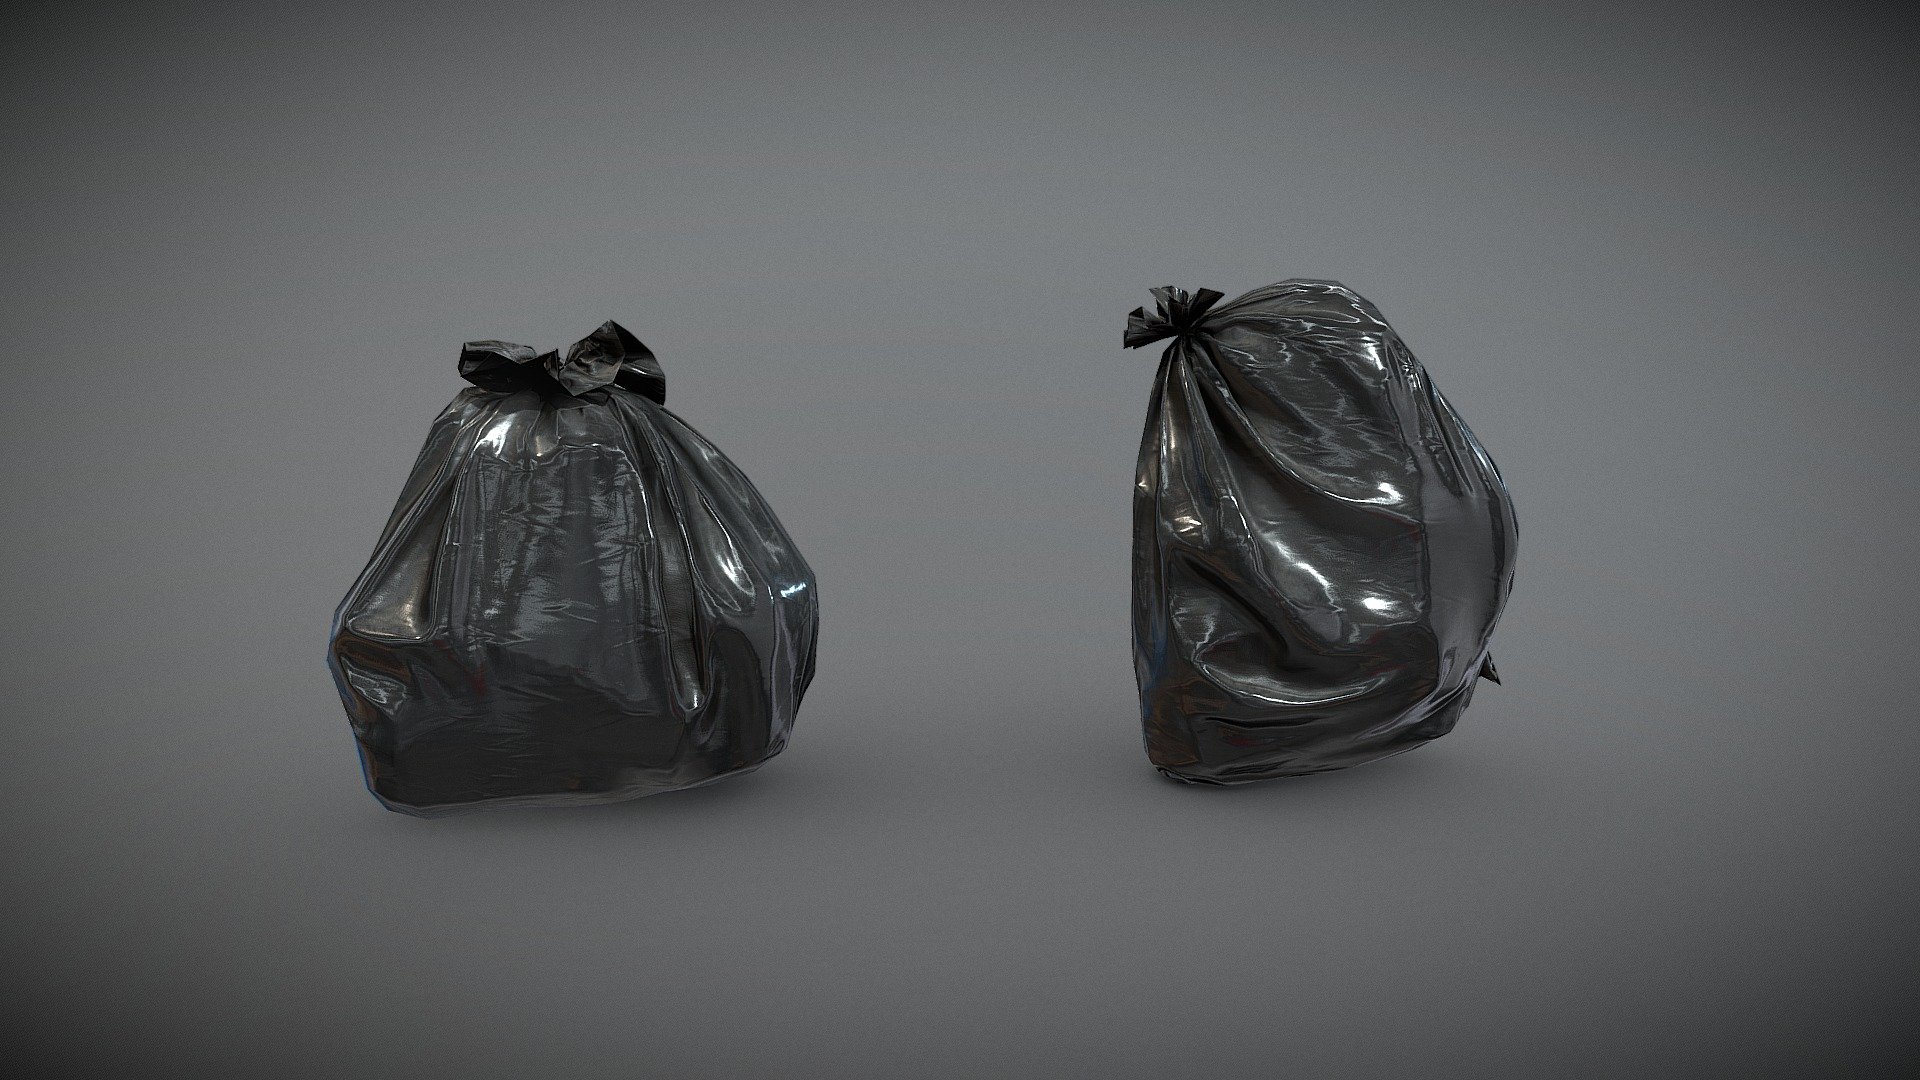 3D Low Poly game ready model of 2 Garbage Bags. 3 Different textures included:




Created with 3ds Max 2018.

Textured in Substance Painter.

Real-world scale and centered.

UnwrapUVW included.

The unit of measurement used for the model is centimeters.

Total poly for 2 bags: 1.240 (2.425 tris)

PBR Materials with 4k textures.

Textures included: Albedo, Normals, Metalness, Roughness, AO.

Rendered in Marmoset Toolbag

3 Albedo colors included.

Also included in Urban Trash Pack Vol 1, 2 &amp; 3

Formats included: FBX / OBJ / 3DS

This model can be used for any game, film, personal project, etc. You may not resell or redistribute any content - Plastic Garbage Bags - Low Poly - Buy Royalty Free 3D model by MSWoodvine 3d model